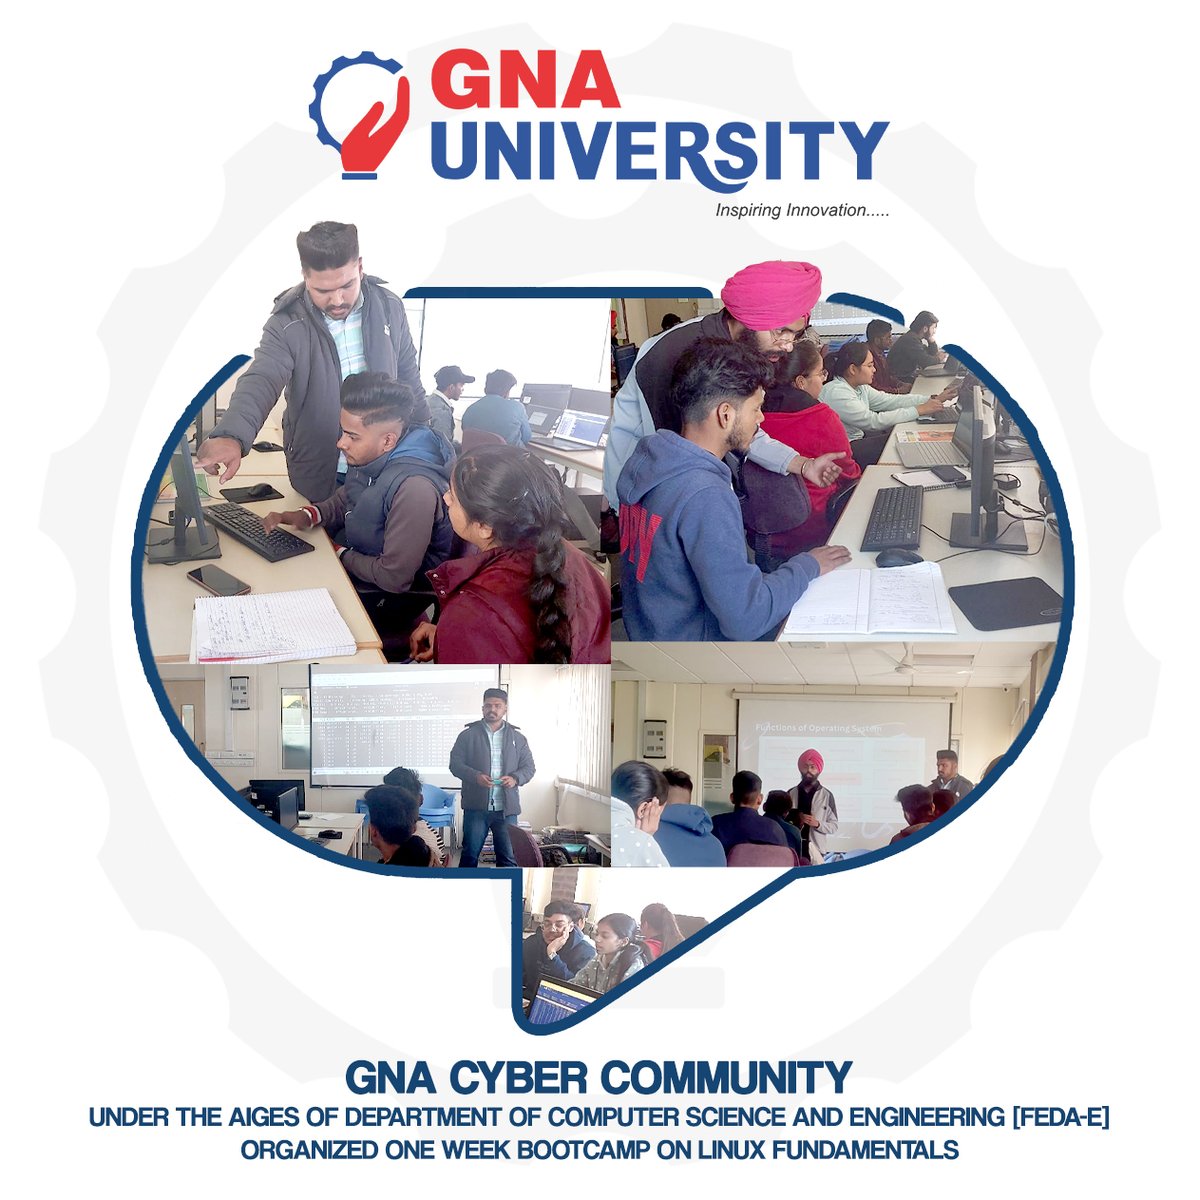 #GNA #CyberCommunity, Department of #ComputerScience and #Engineering organized one week #Bootcamp on Linux Fundamentals  which covered #LinuxBasics, Operating System Fundamentals, Linux Commands, Booting-up and Shutting Down Processes, User & #GroupManagement.